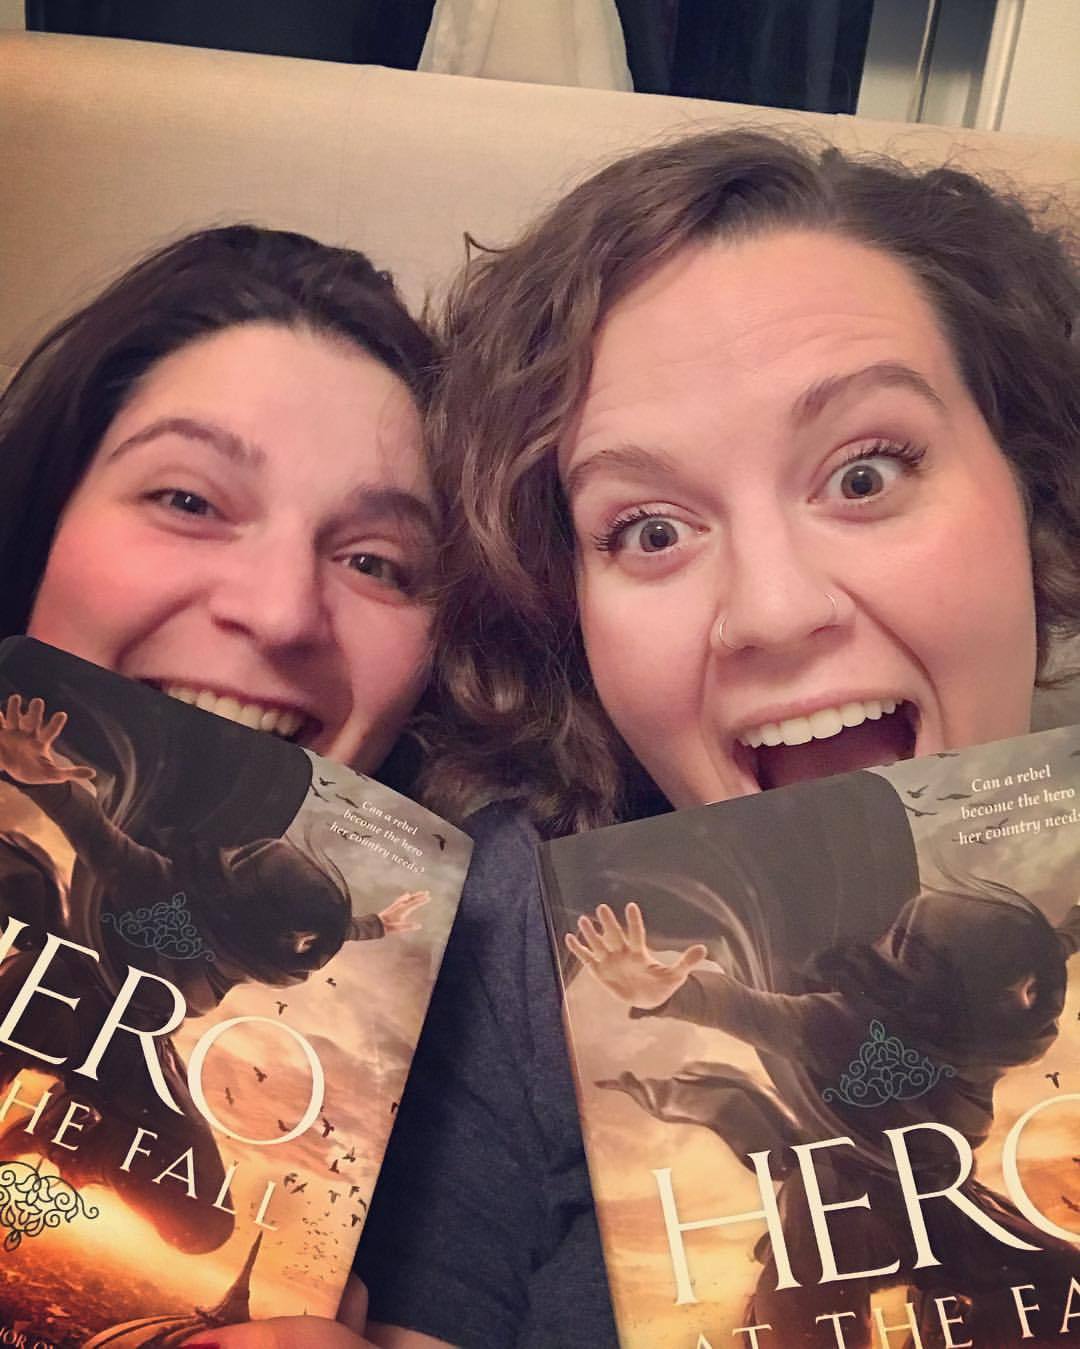 When you and your best friend preorder the same back and lay in bed all night reading it. @alwynhamilton #heroatthefall #rebelofthesands #maryreads #amreading #readersofinstagram